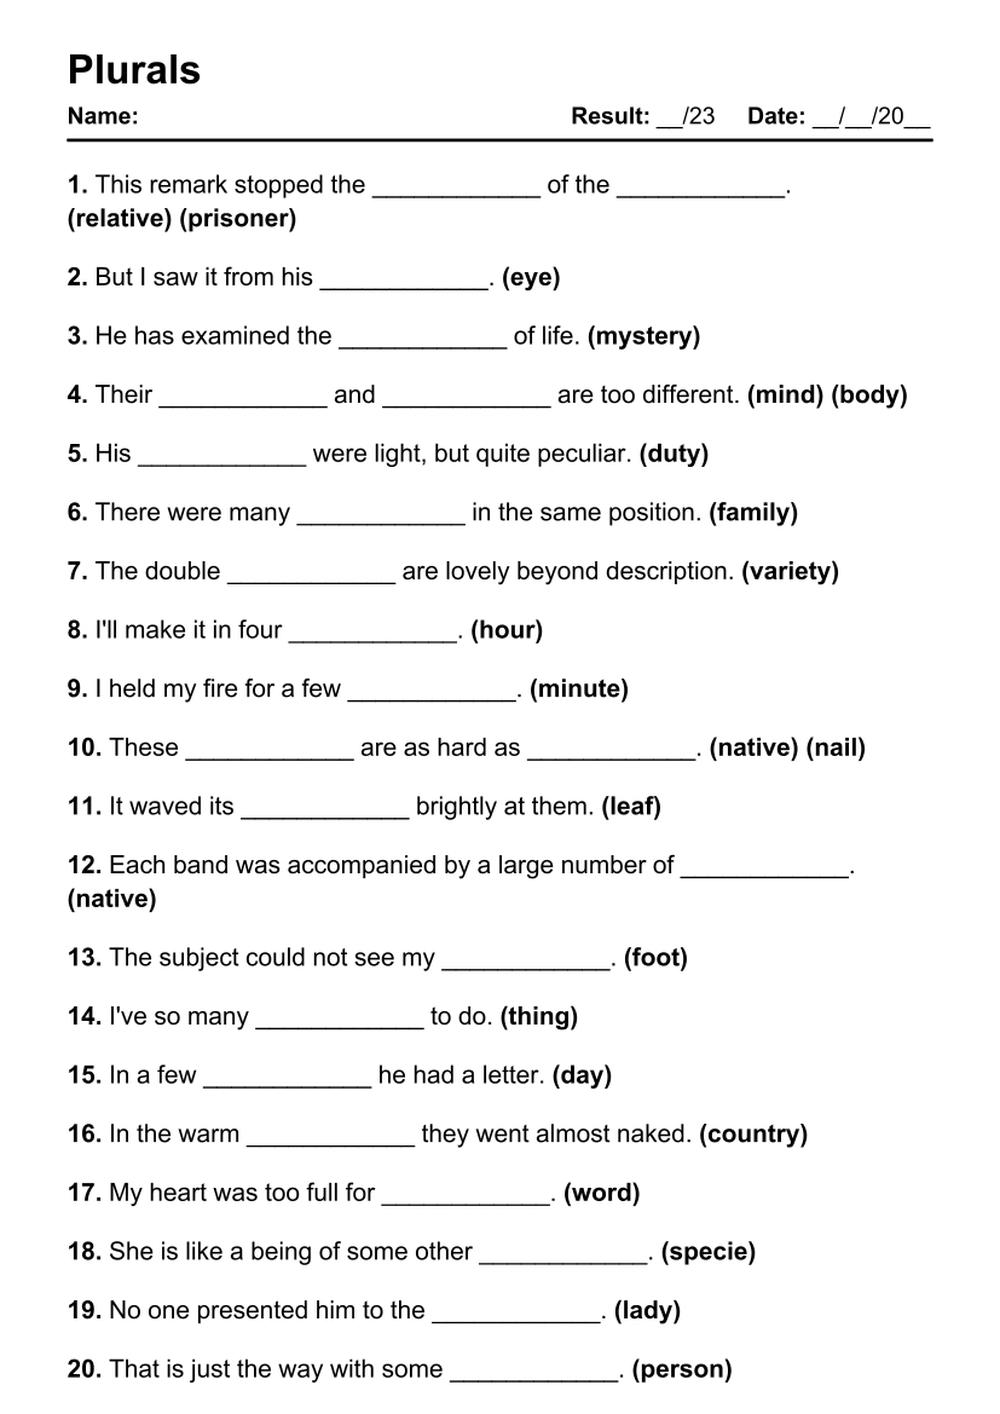 Printable Plurals Exercises - PDF Worksheet with Answers - Test 16